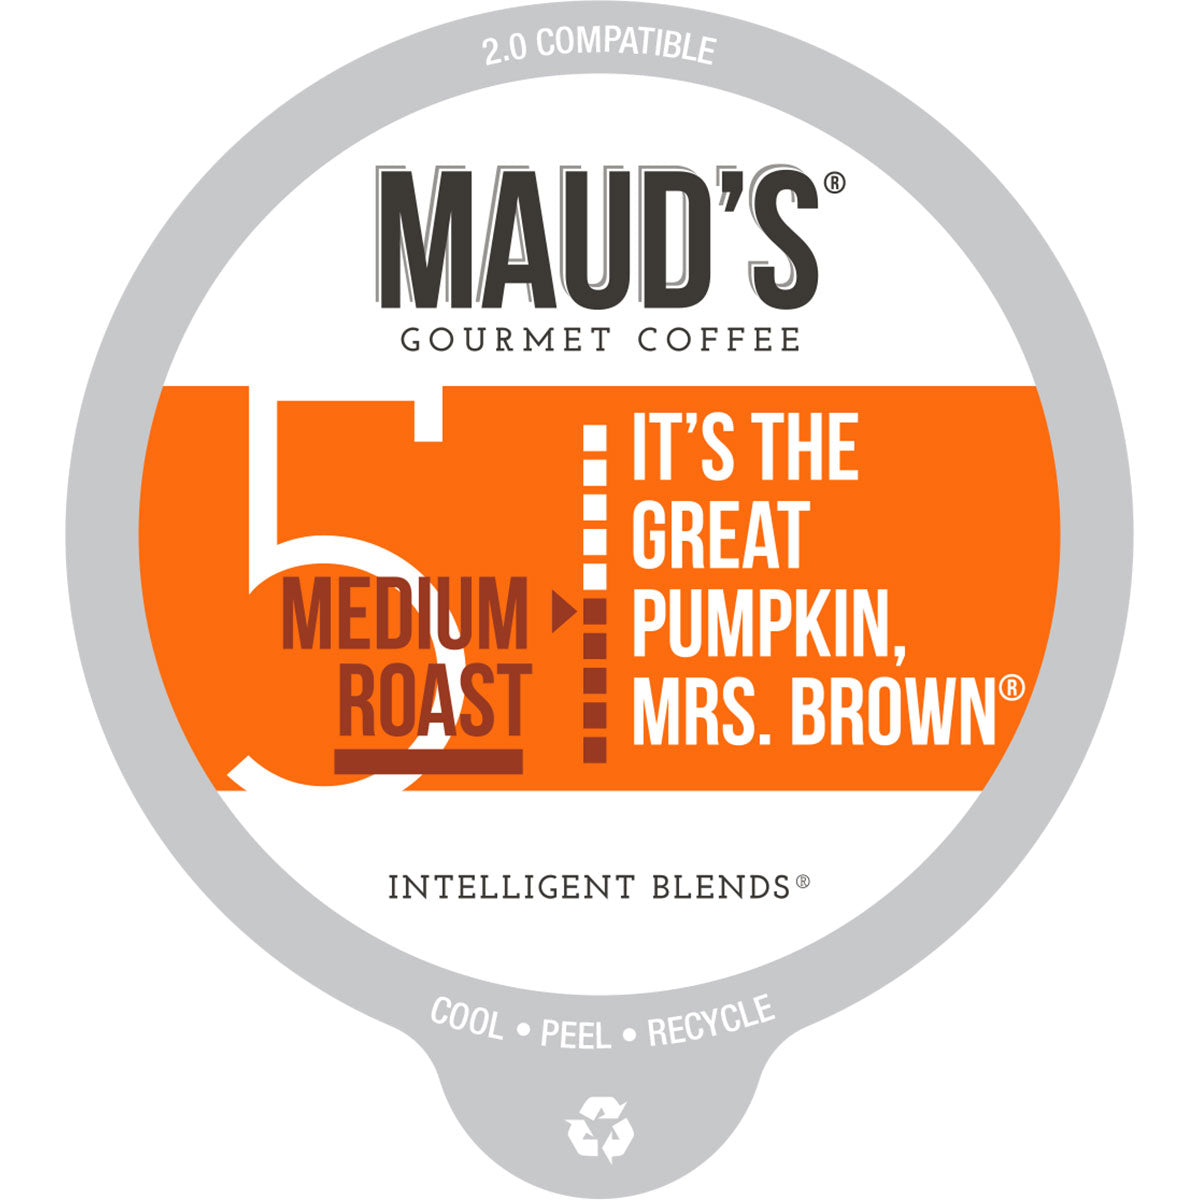 Maud's Pumpkin Spice Flavored Coffee Pods  (It's The Great Pumpkin, Mrs. Brown)